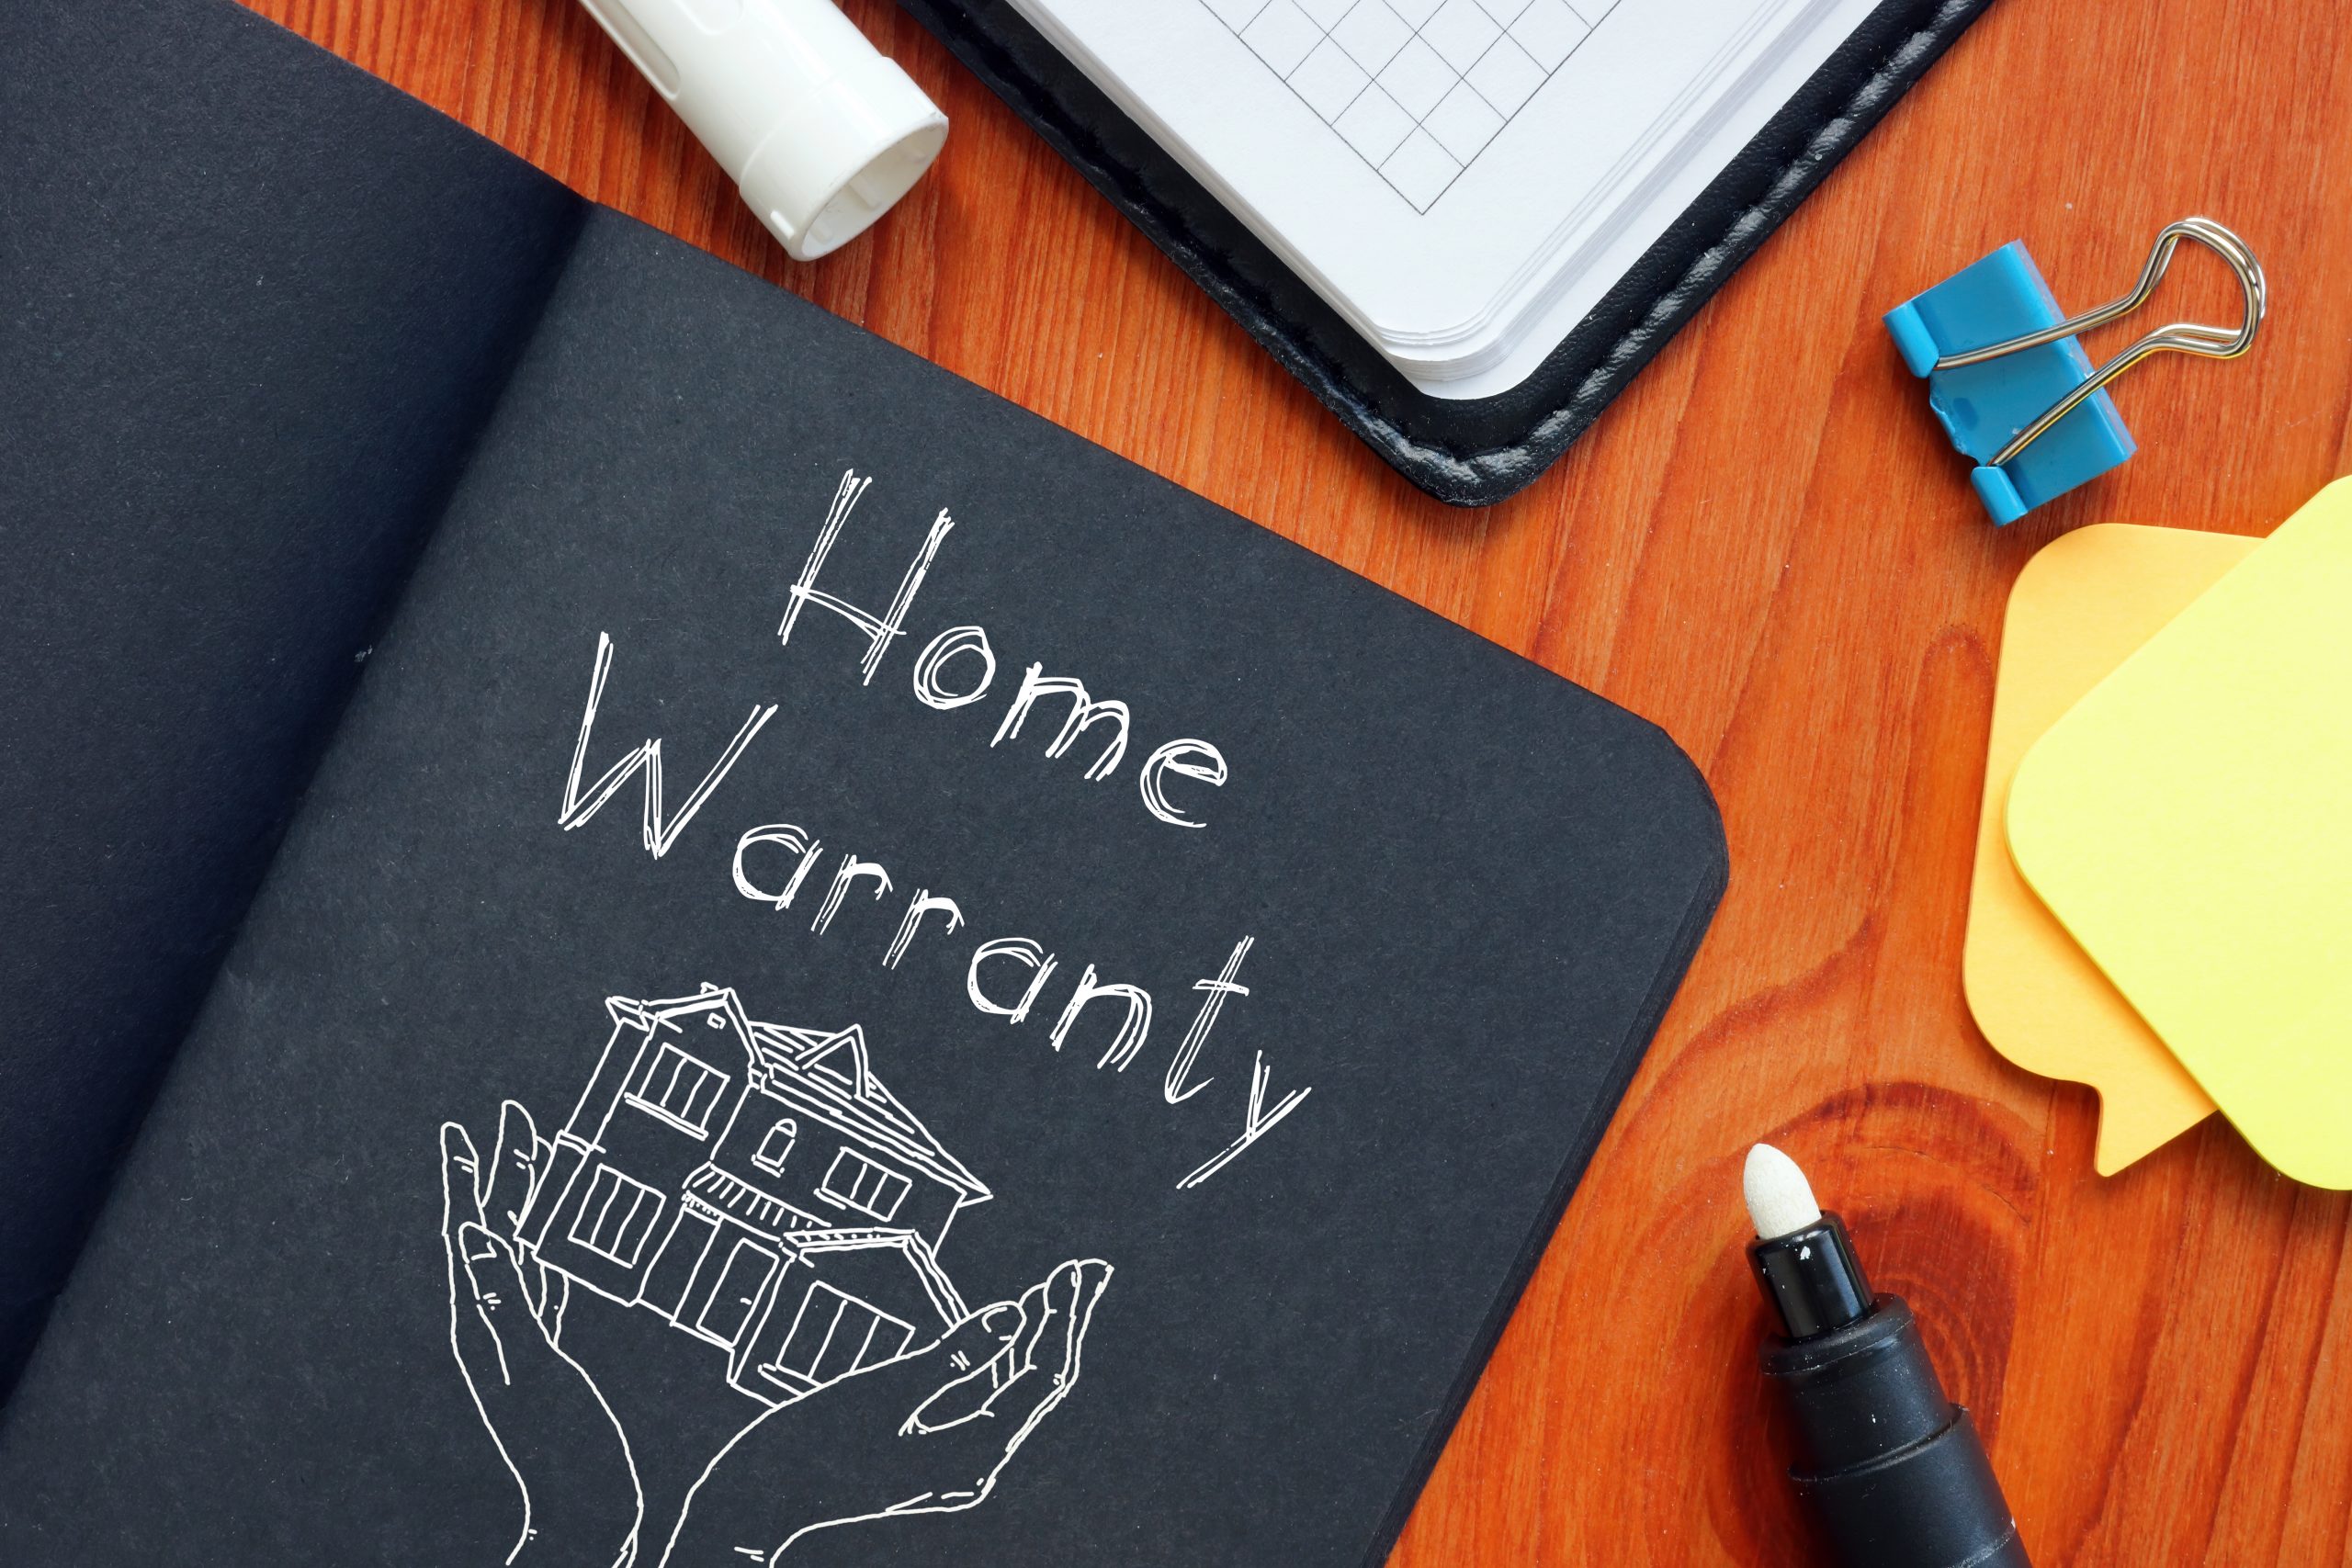 Home Warranty is shown on the photo using the text